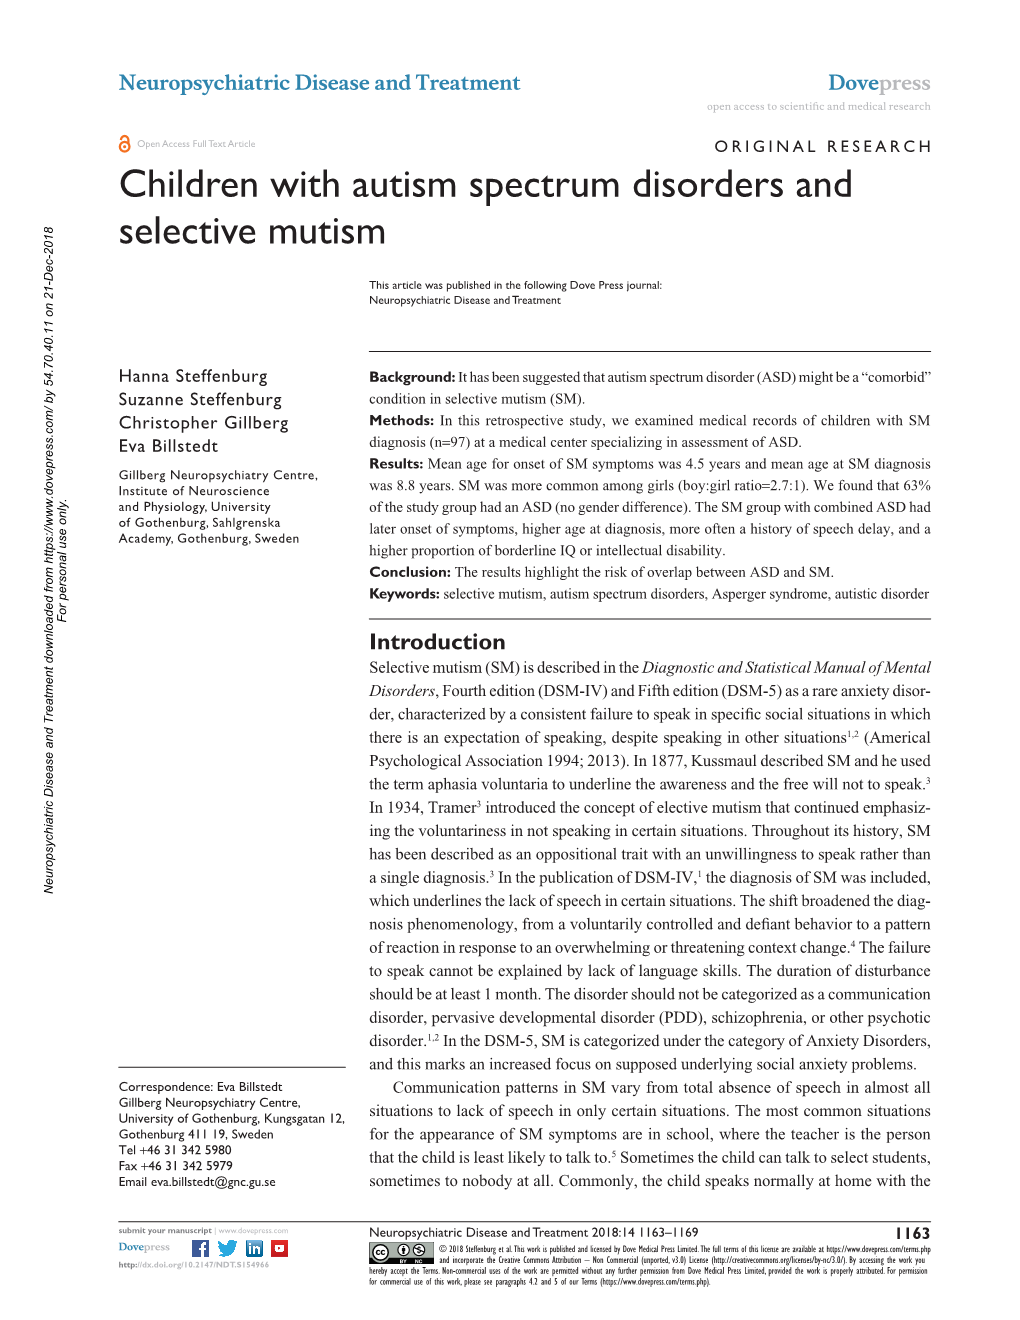 Children with Autism Spectrum Disorders and Selective Mutism